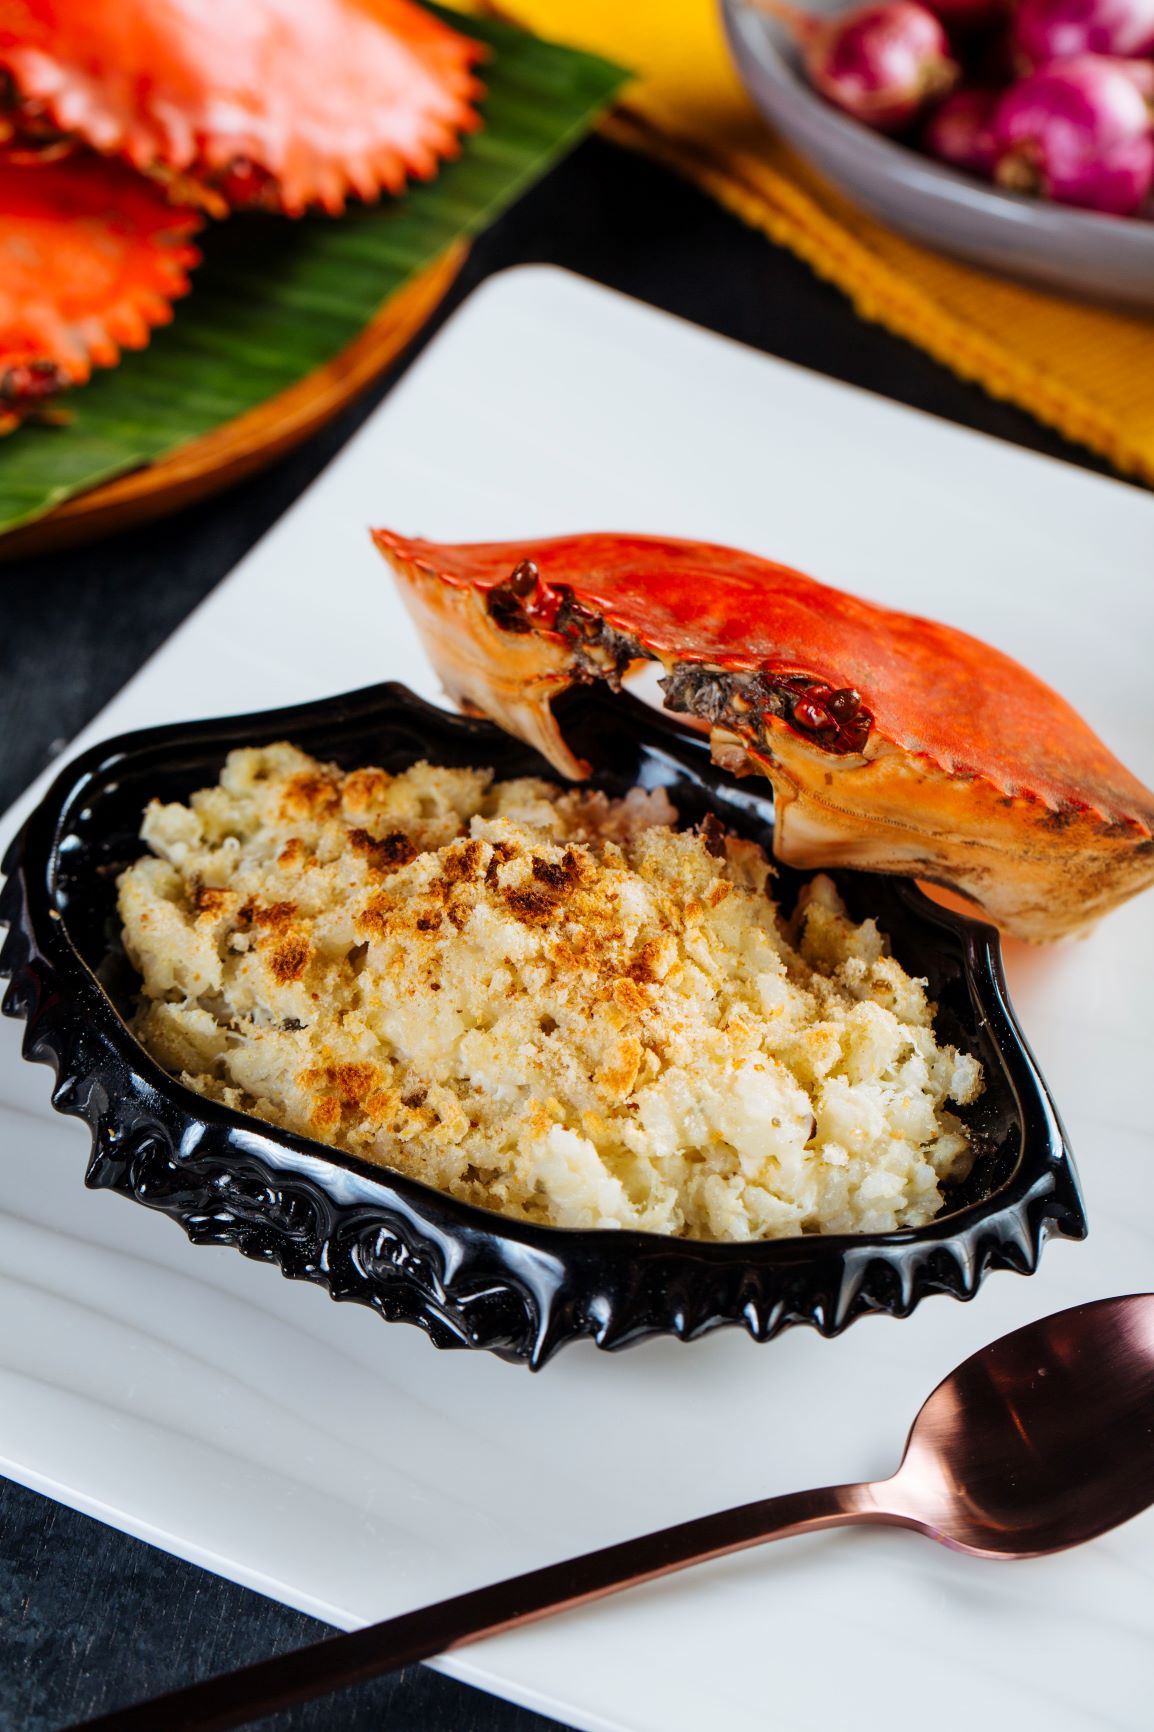 Baked Crab. Photo: Ministry of Crab Manila